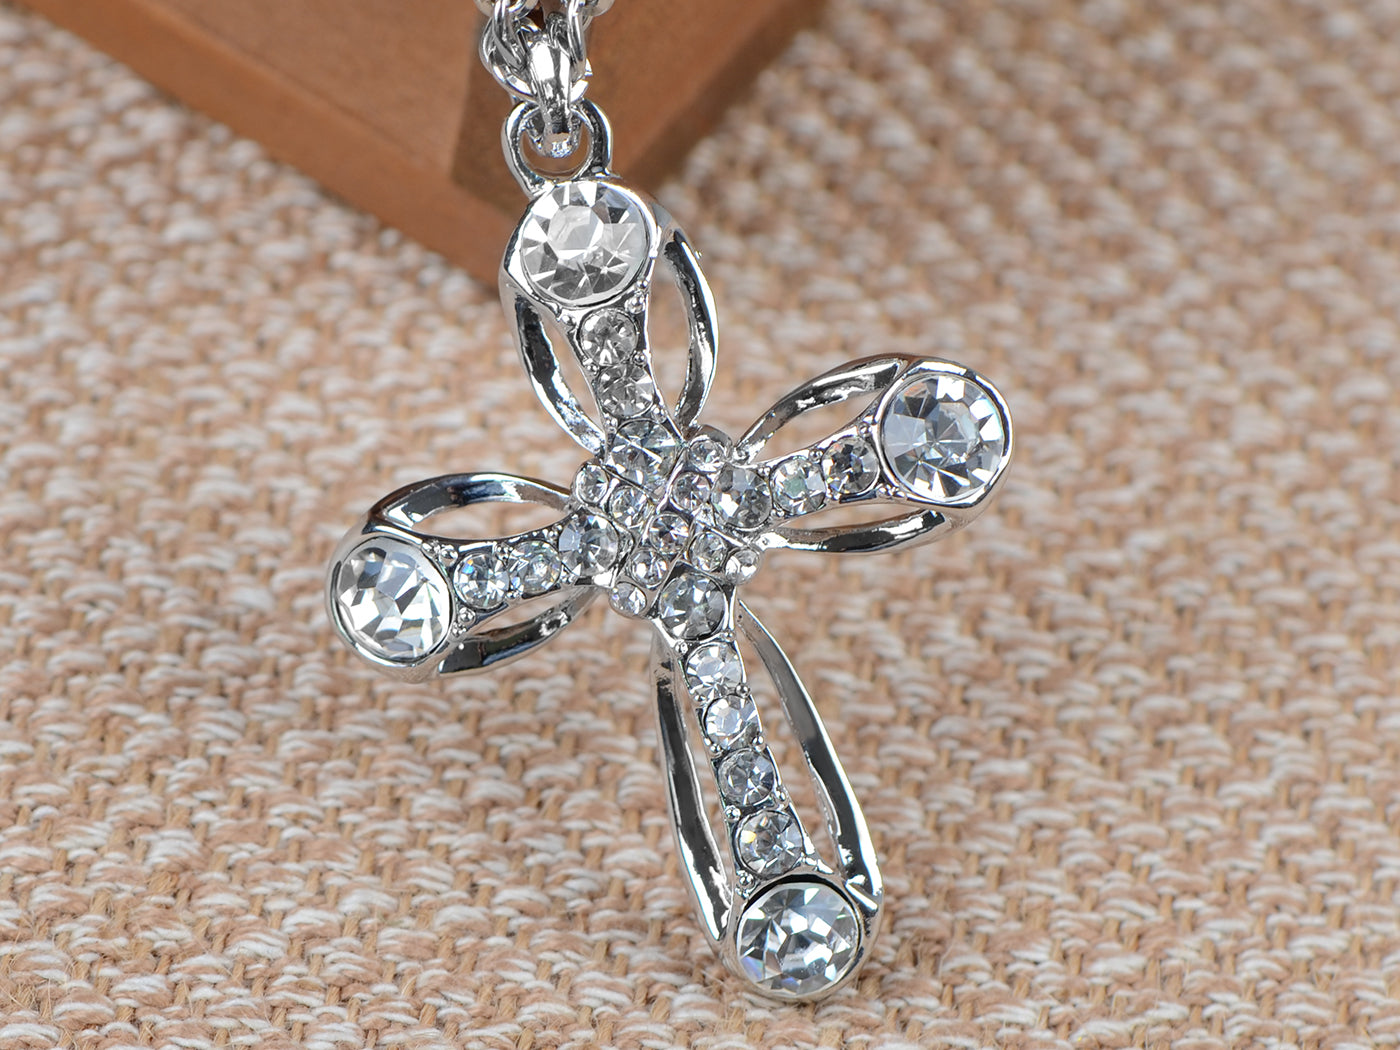 Beautiful Silver Cut Out Holy Across Pendant Necklace